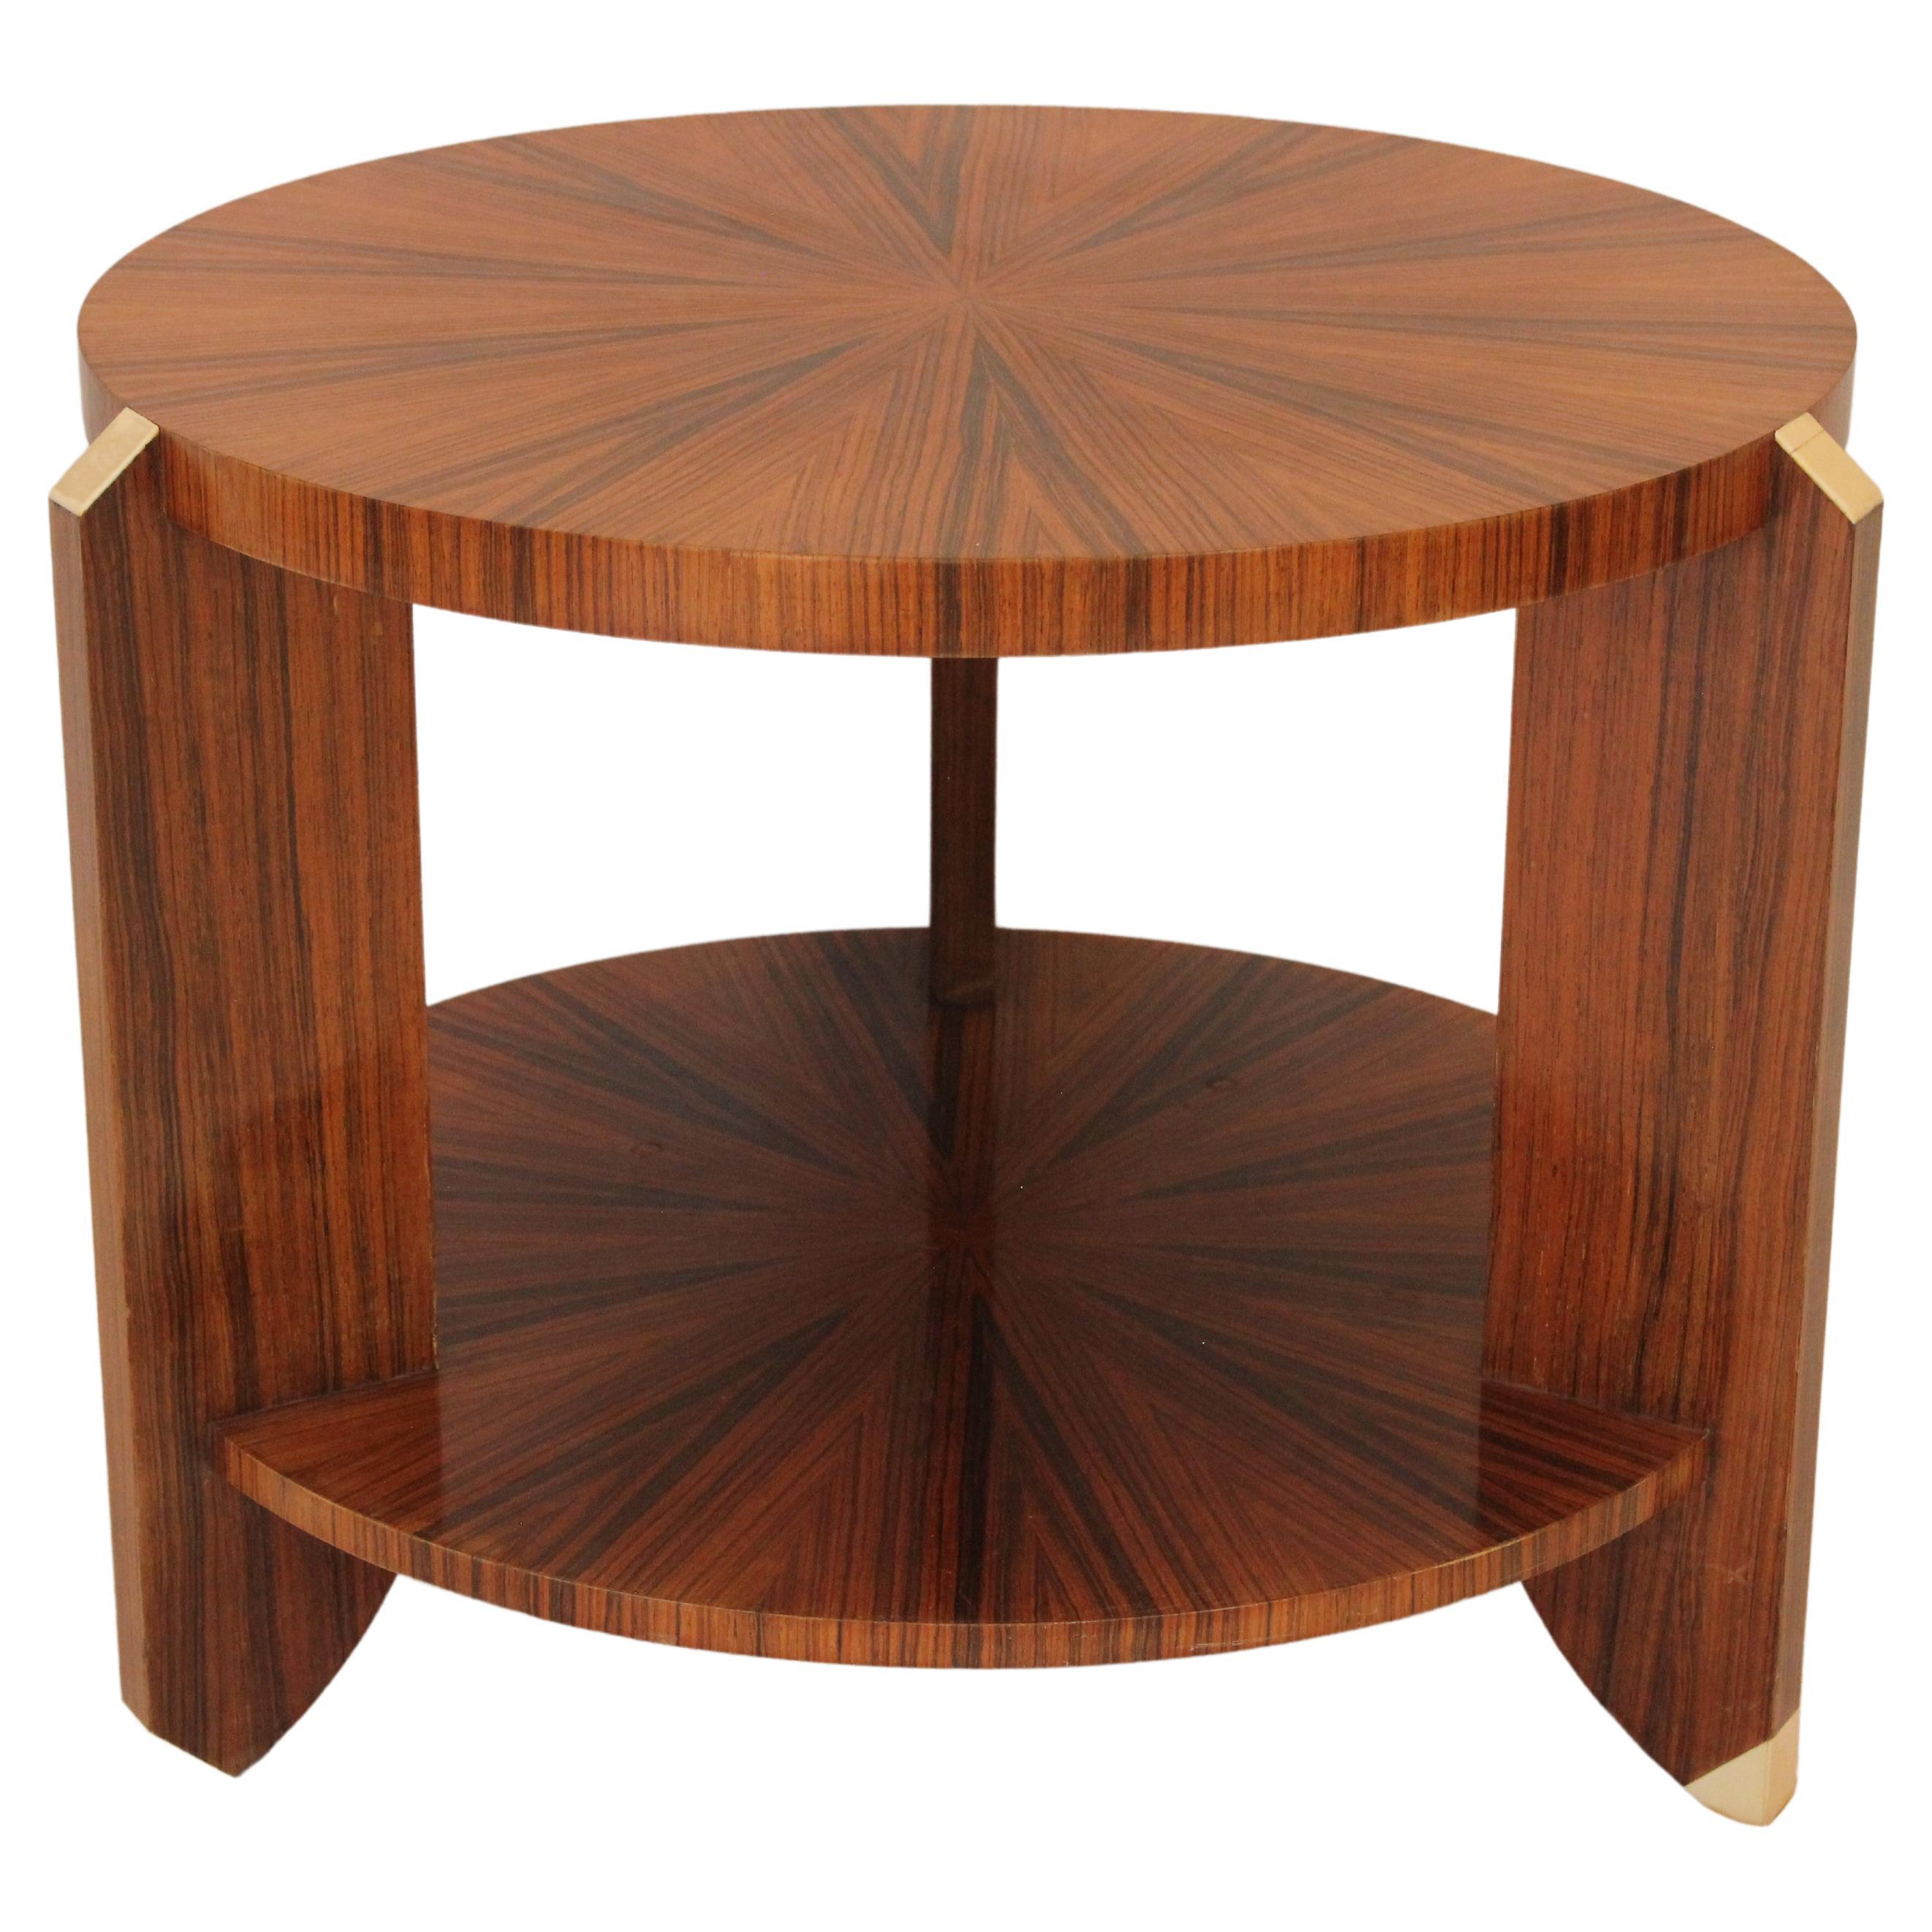 French Art Deco Walnut Starburst Marquetry Moderne Side Table Circa 1930 